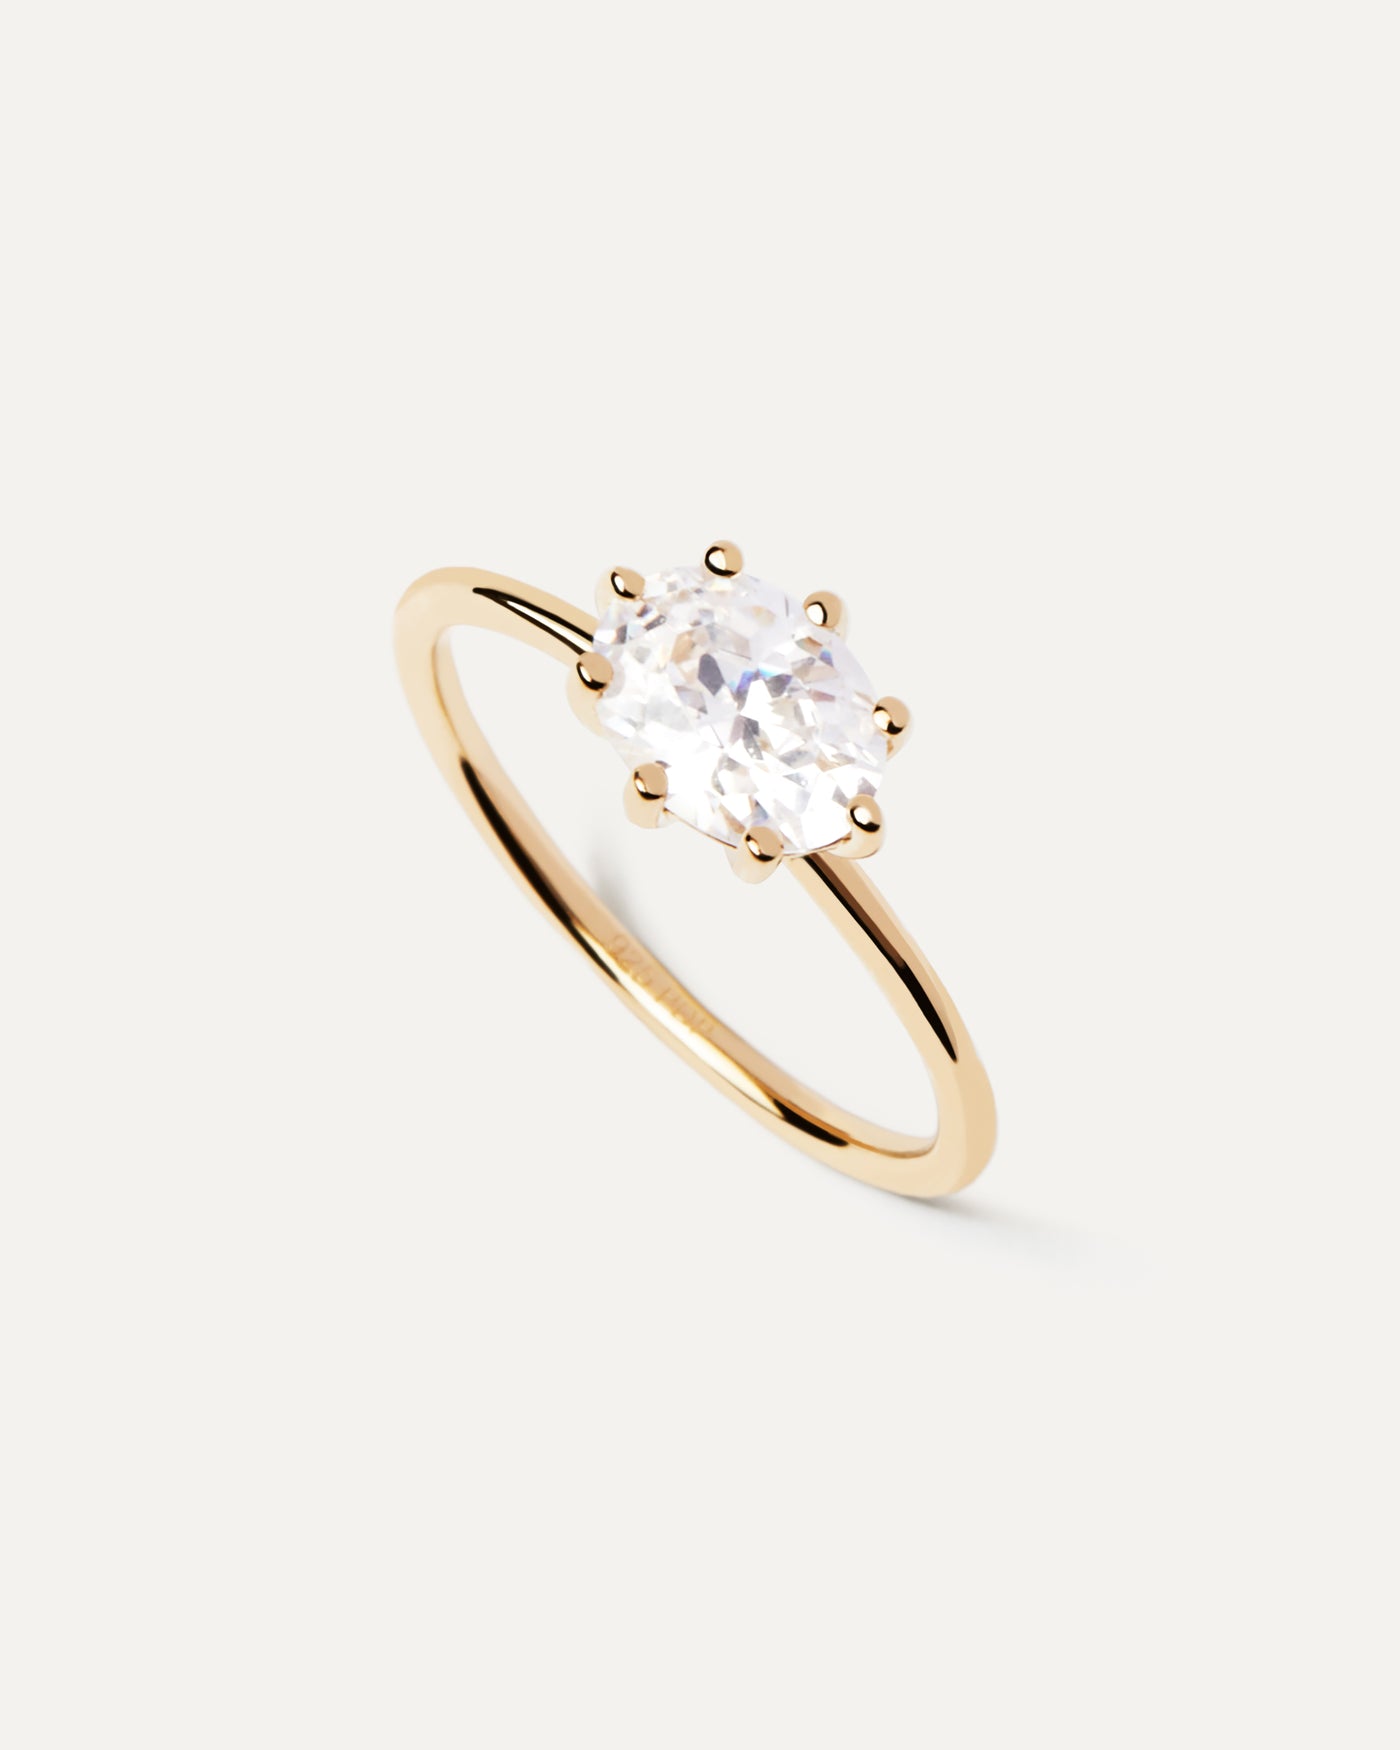 2023 Selection | Kim Ring. Gold-plated eight-prong setting solitary ring with white zirconia. Get the latest arrival from PDPAOLA. Place your order safely and get this Best Seller. Free Shipping.